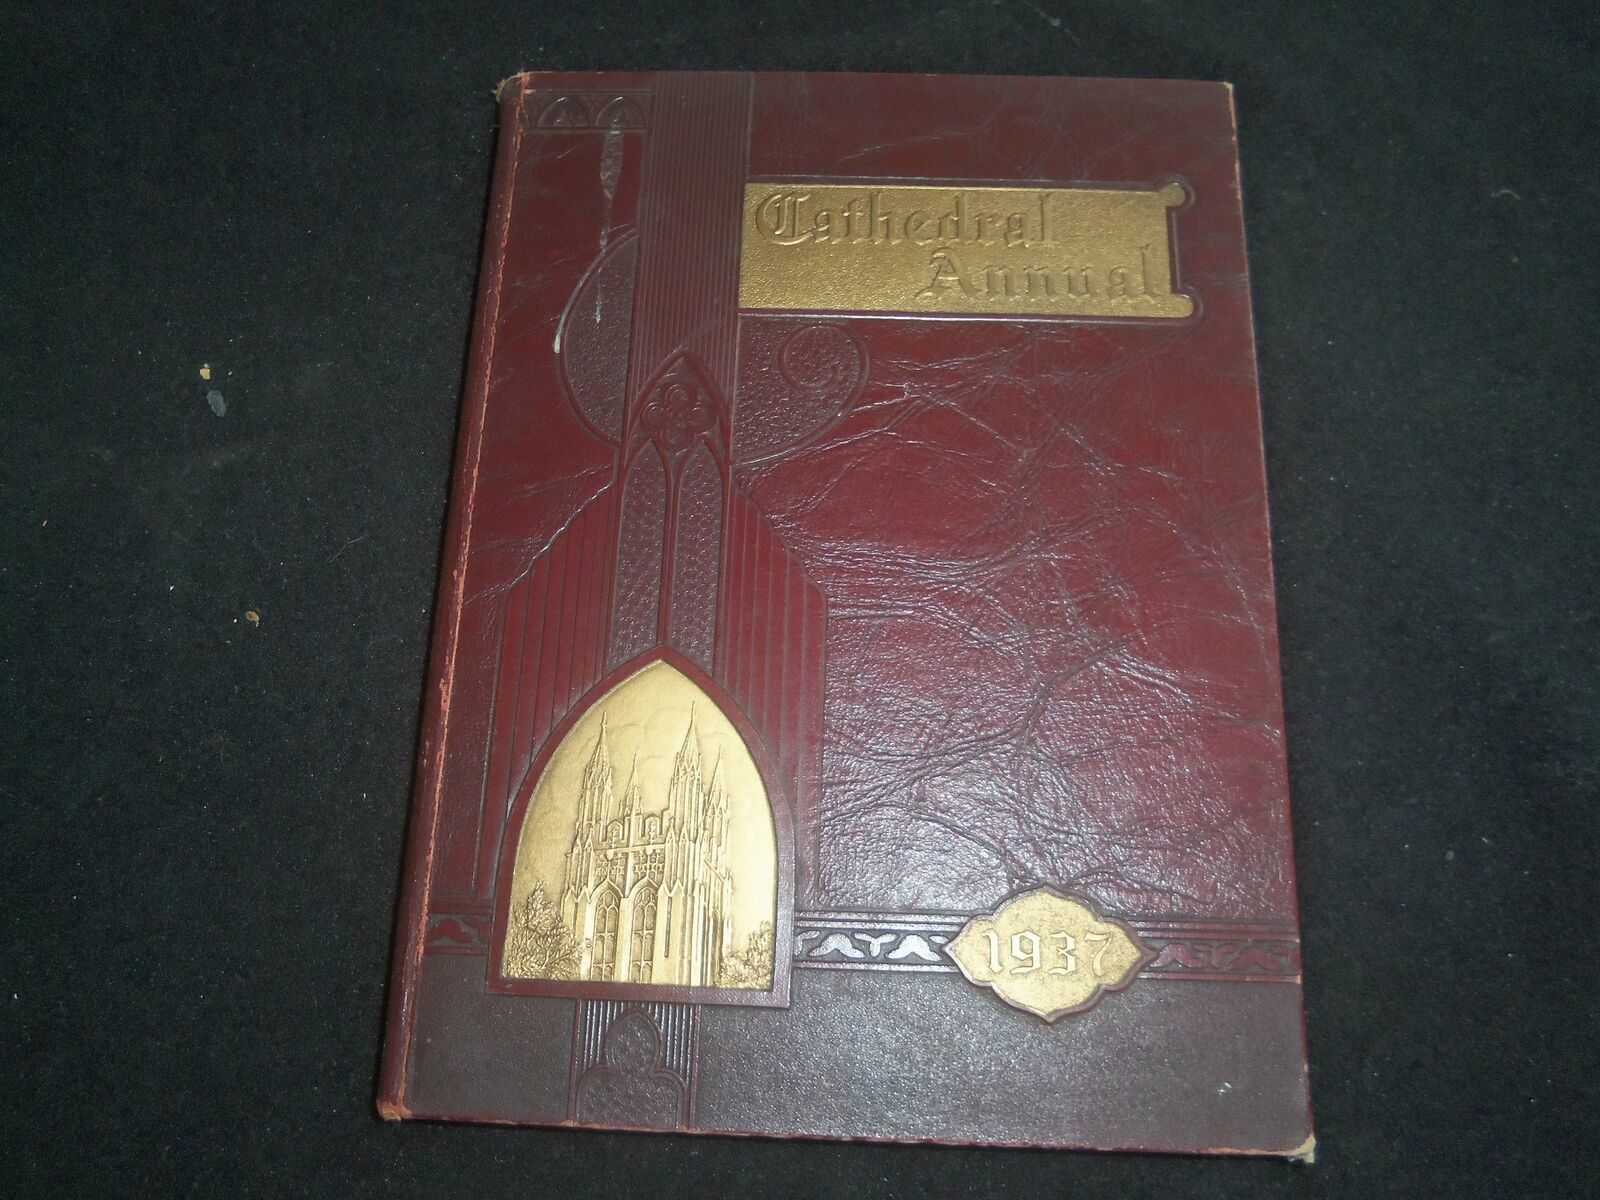 1937 CATHEDRAL COLLEGE OF IMMACULATE CONCEPTION YEARBOOK - BROOKLYN, NY- YB 2525